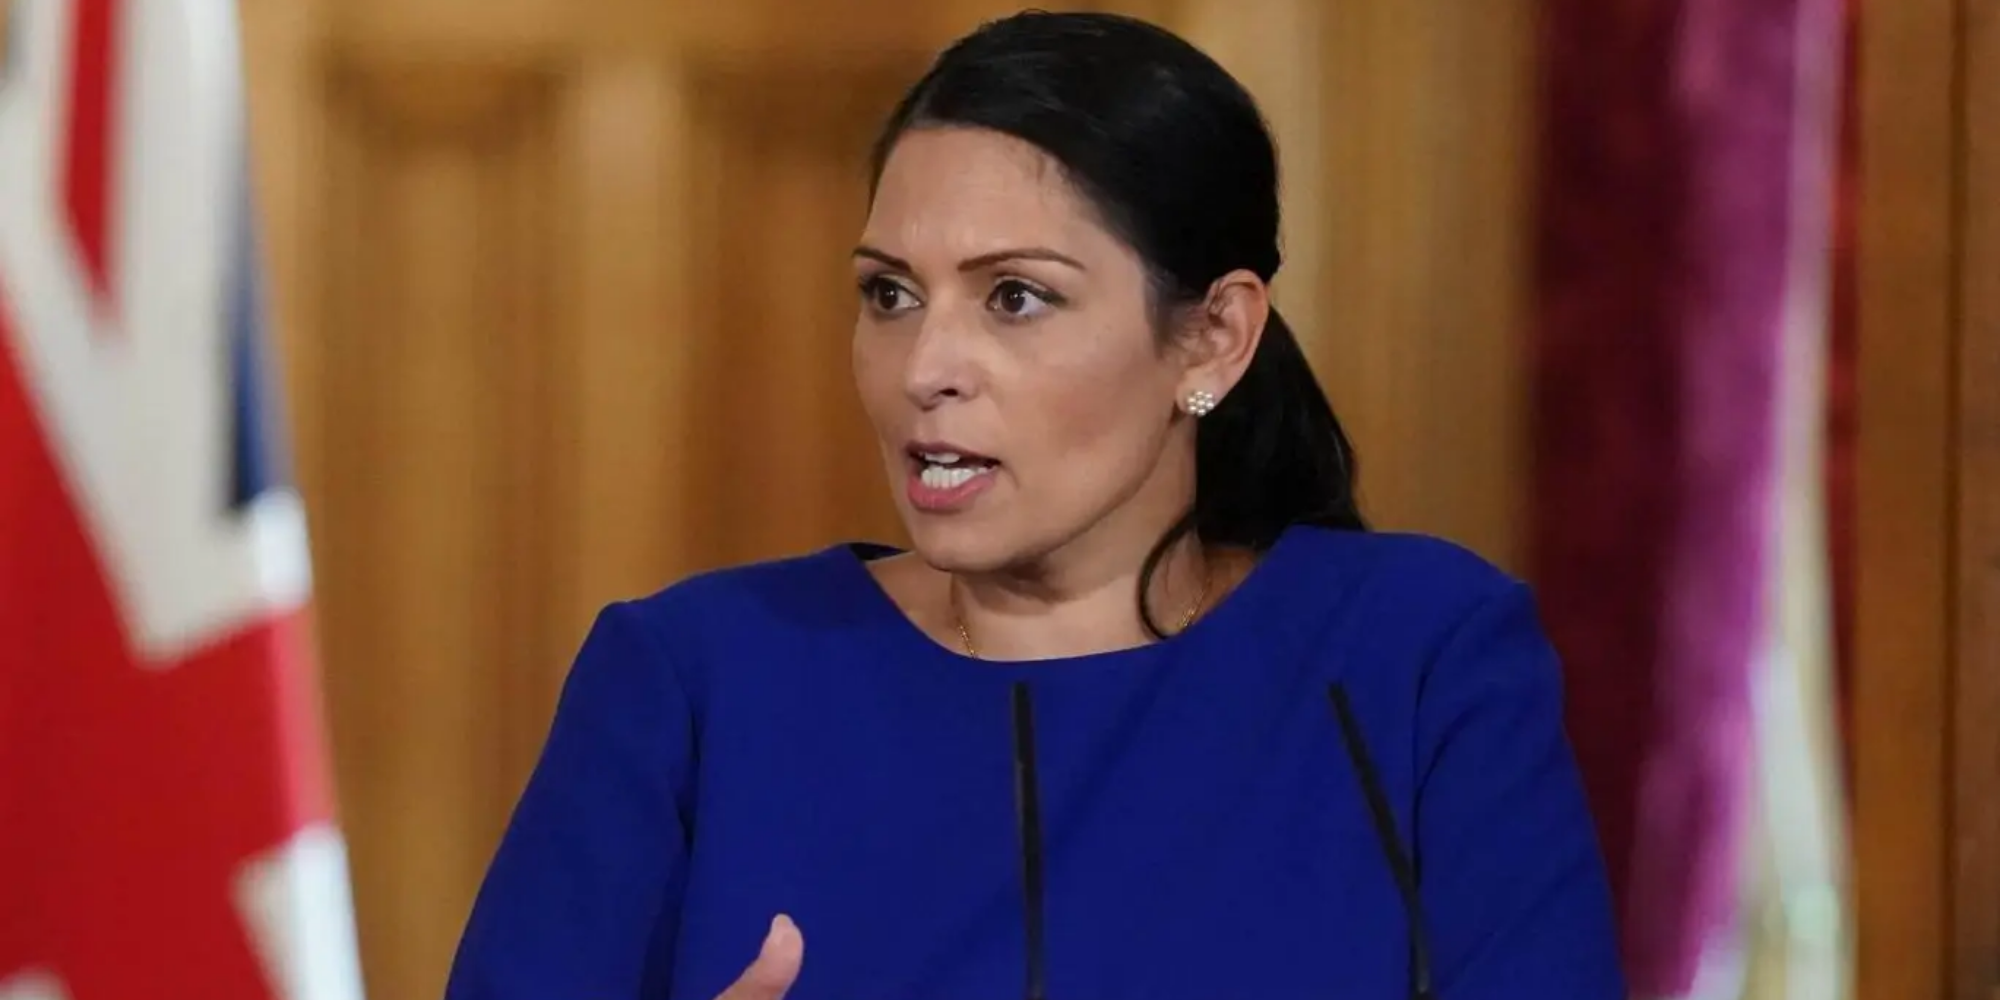 Priti Patel, the home secretary, may be asked to apologise when the report on bullying allegations is finally published